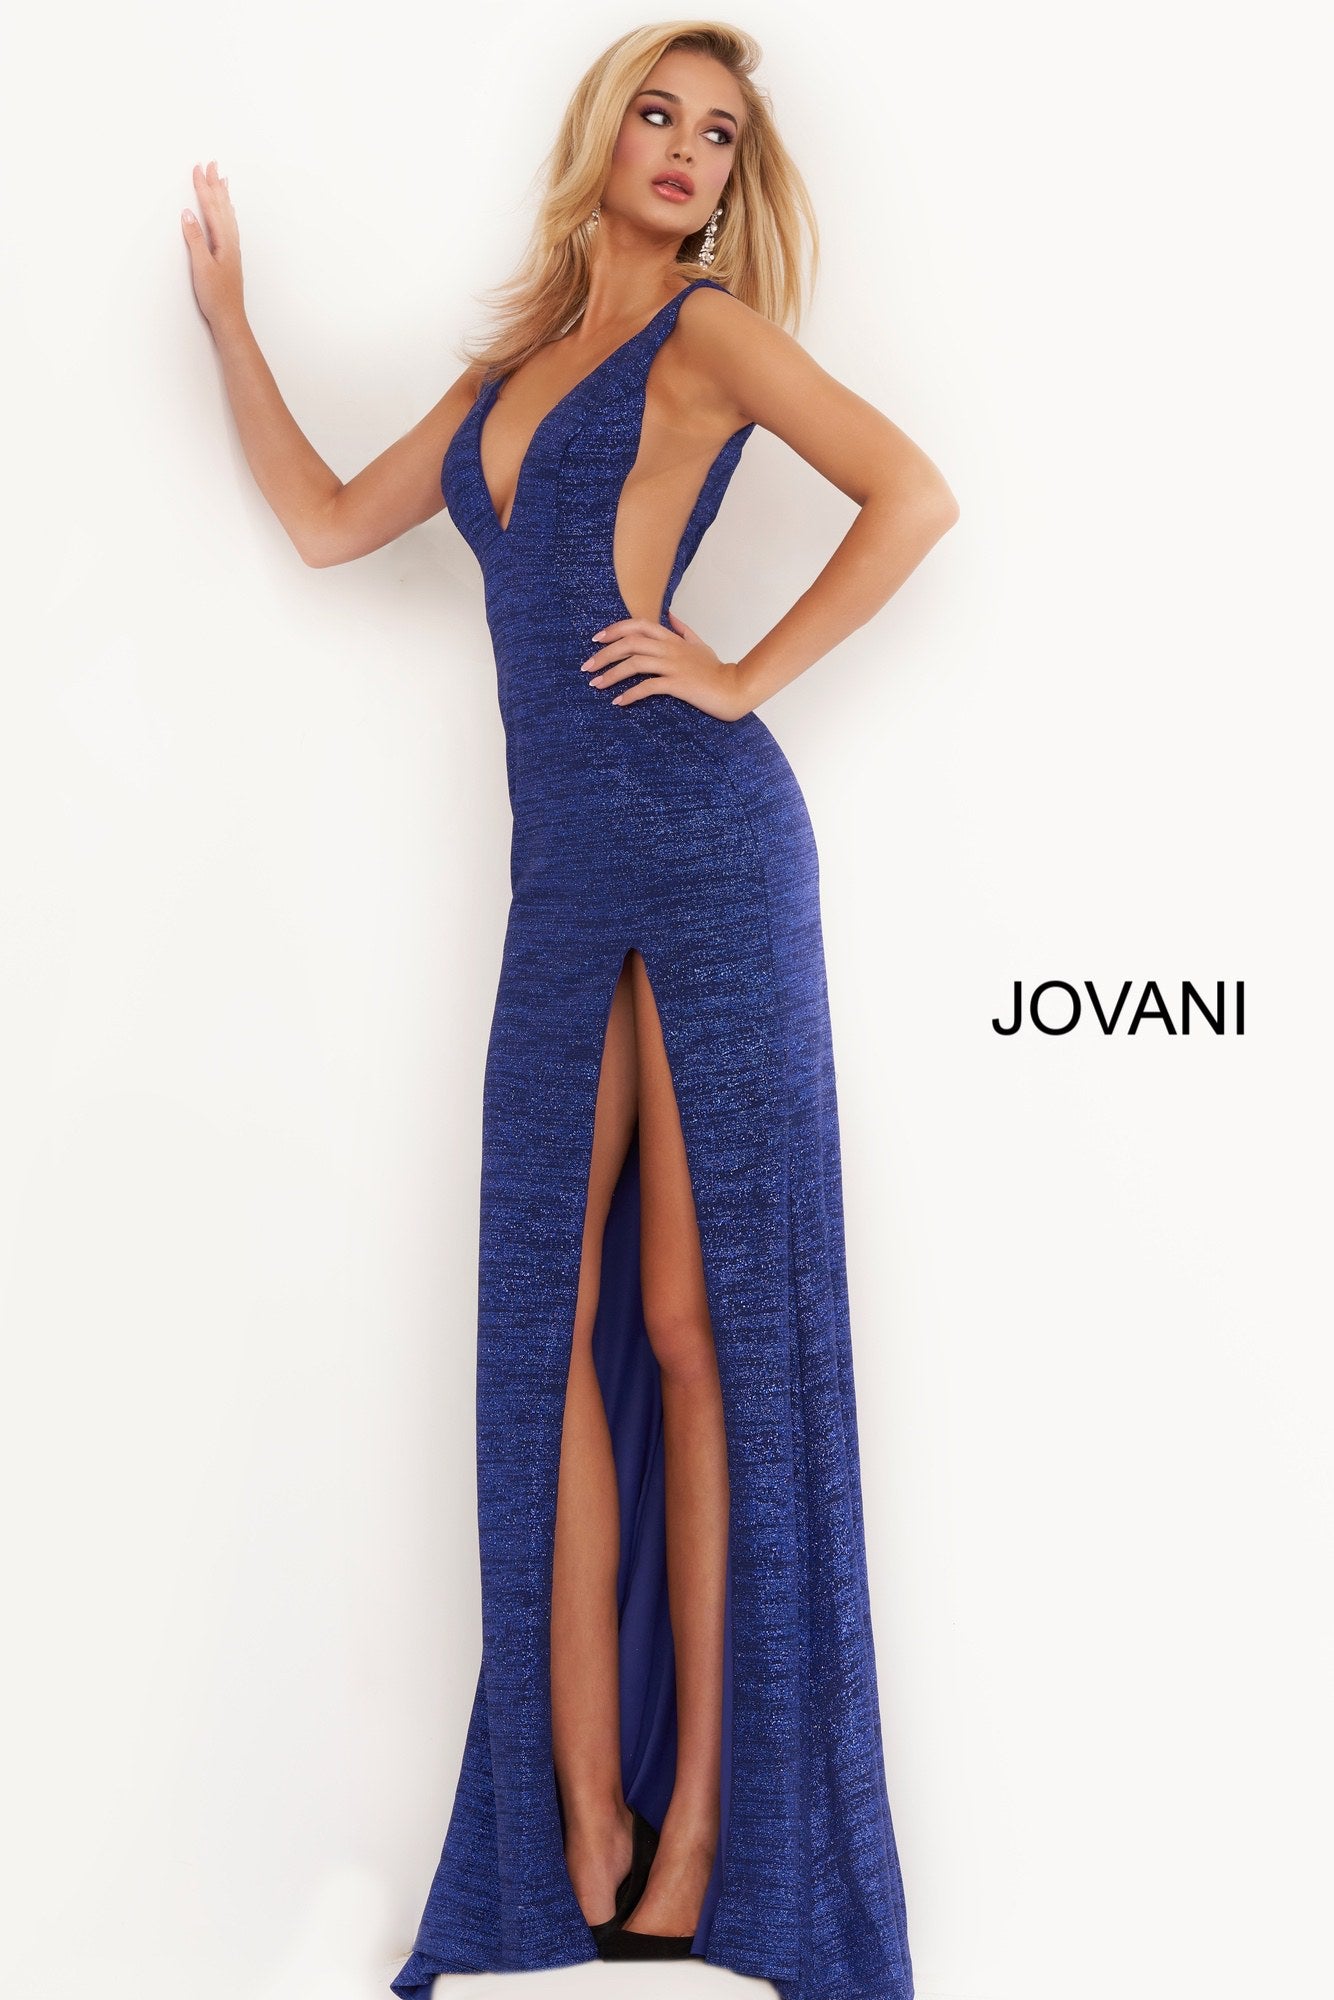 Jovani 02472 is a long Fitted 2020 Prom, Pageant & Formal Evening dress. Featuring a Stretch Glitter jersey material for a touch of shimmer. V Neckline and open v back. sheer side cutout panels. slit in the skirt and small sweeping train. Stretch glitter prom dress, form fitting silhouette, floor length skirt with high slit and train, sleeveless bodice, sheer side inserts, V neck, open back. Available Colors: black/gold, black/multi, gunmetal, hot-pink, jade, red, royal, soft blue/silver